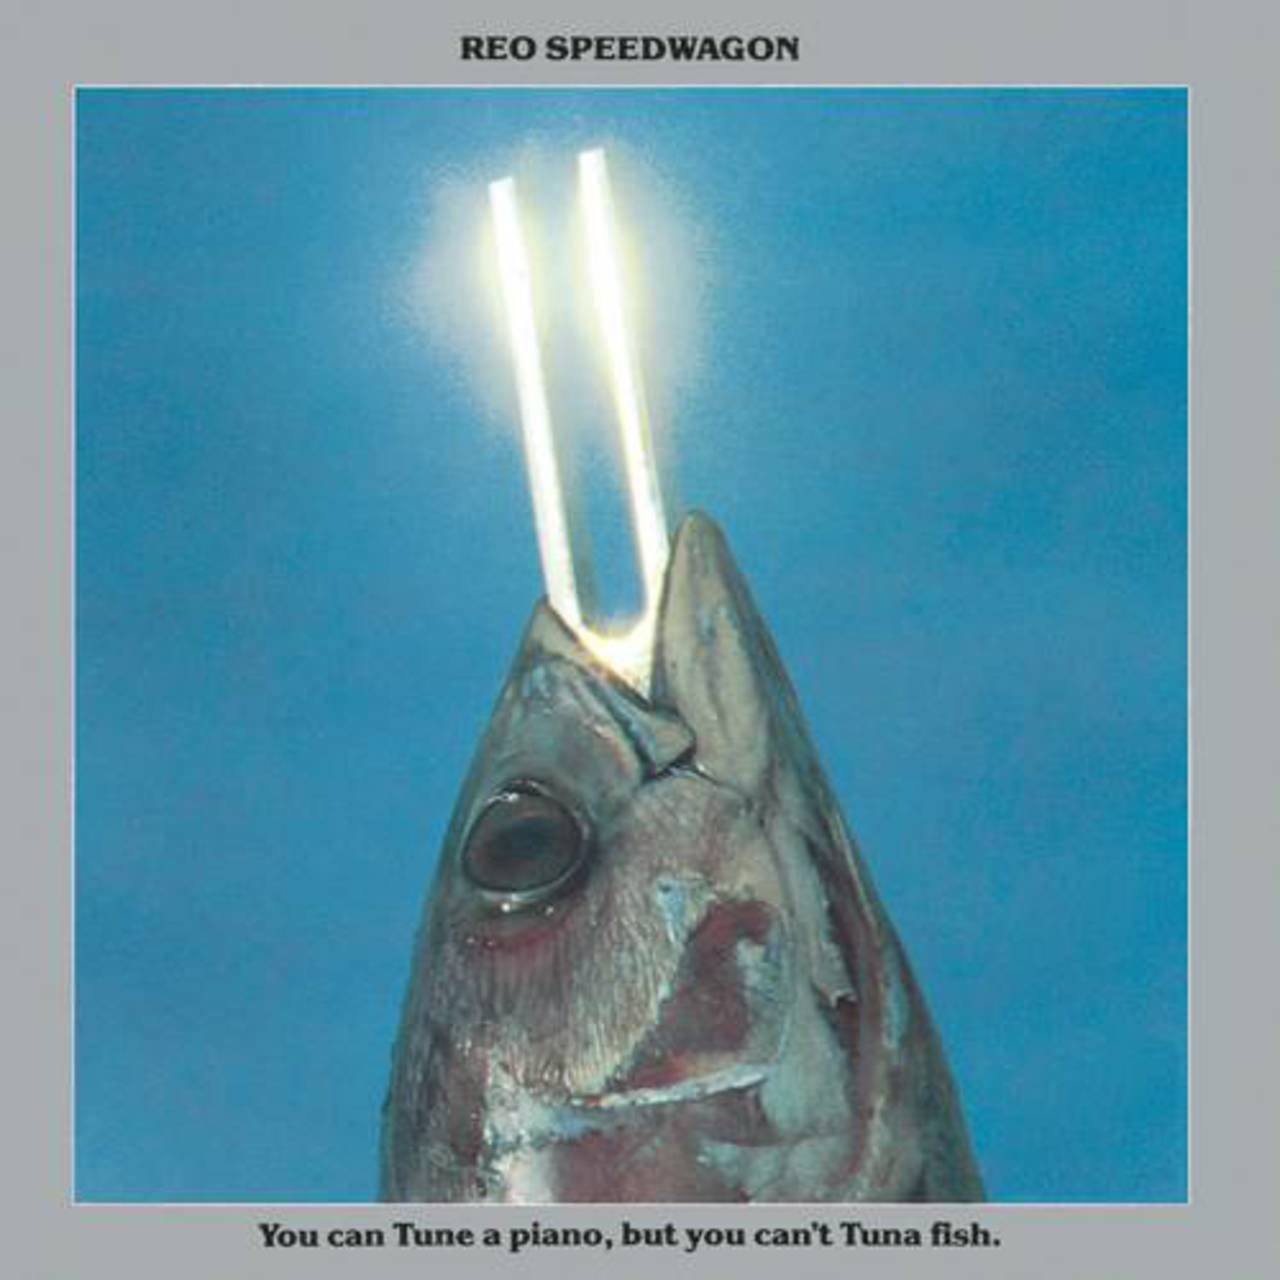 Album artwork for 'You Can Tune A Piano, But You Can't Tuna Fish' by REO Speedwagon